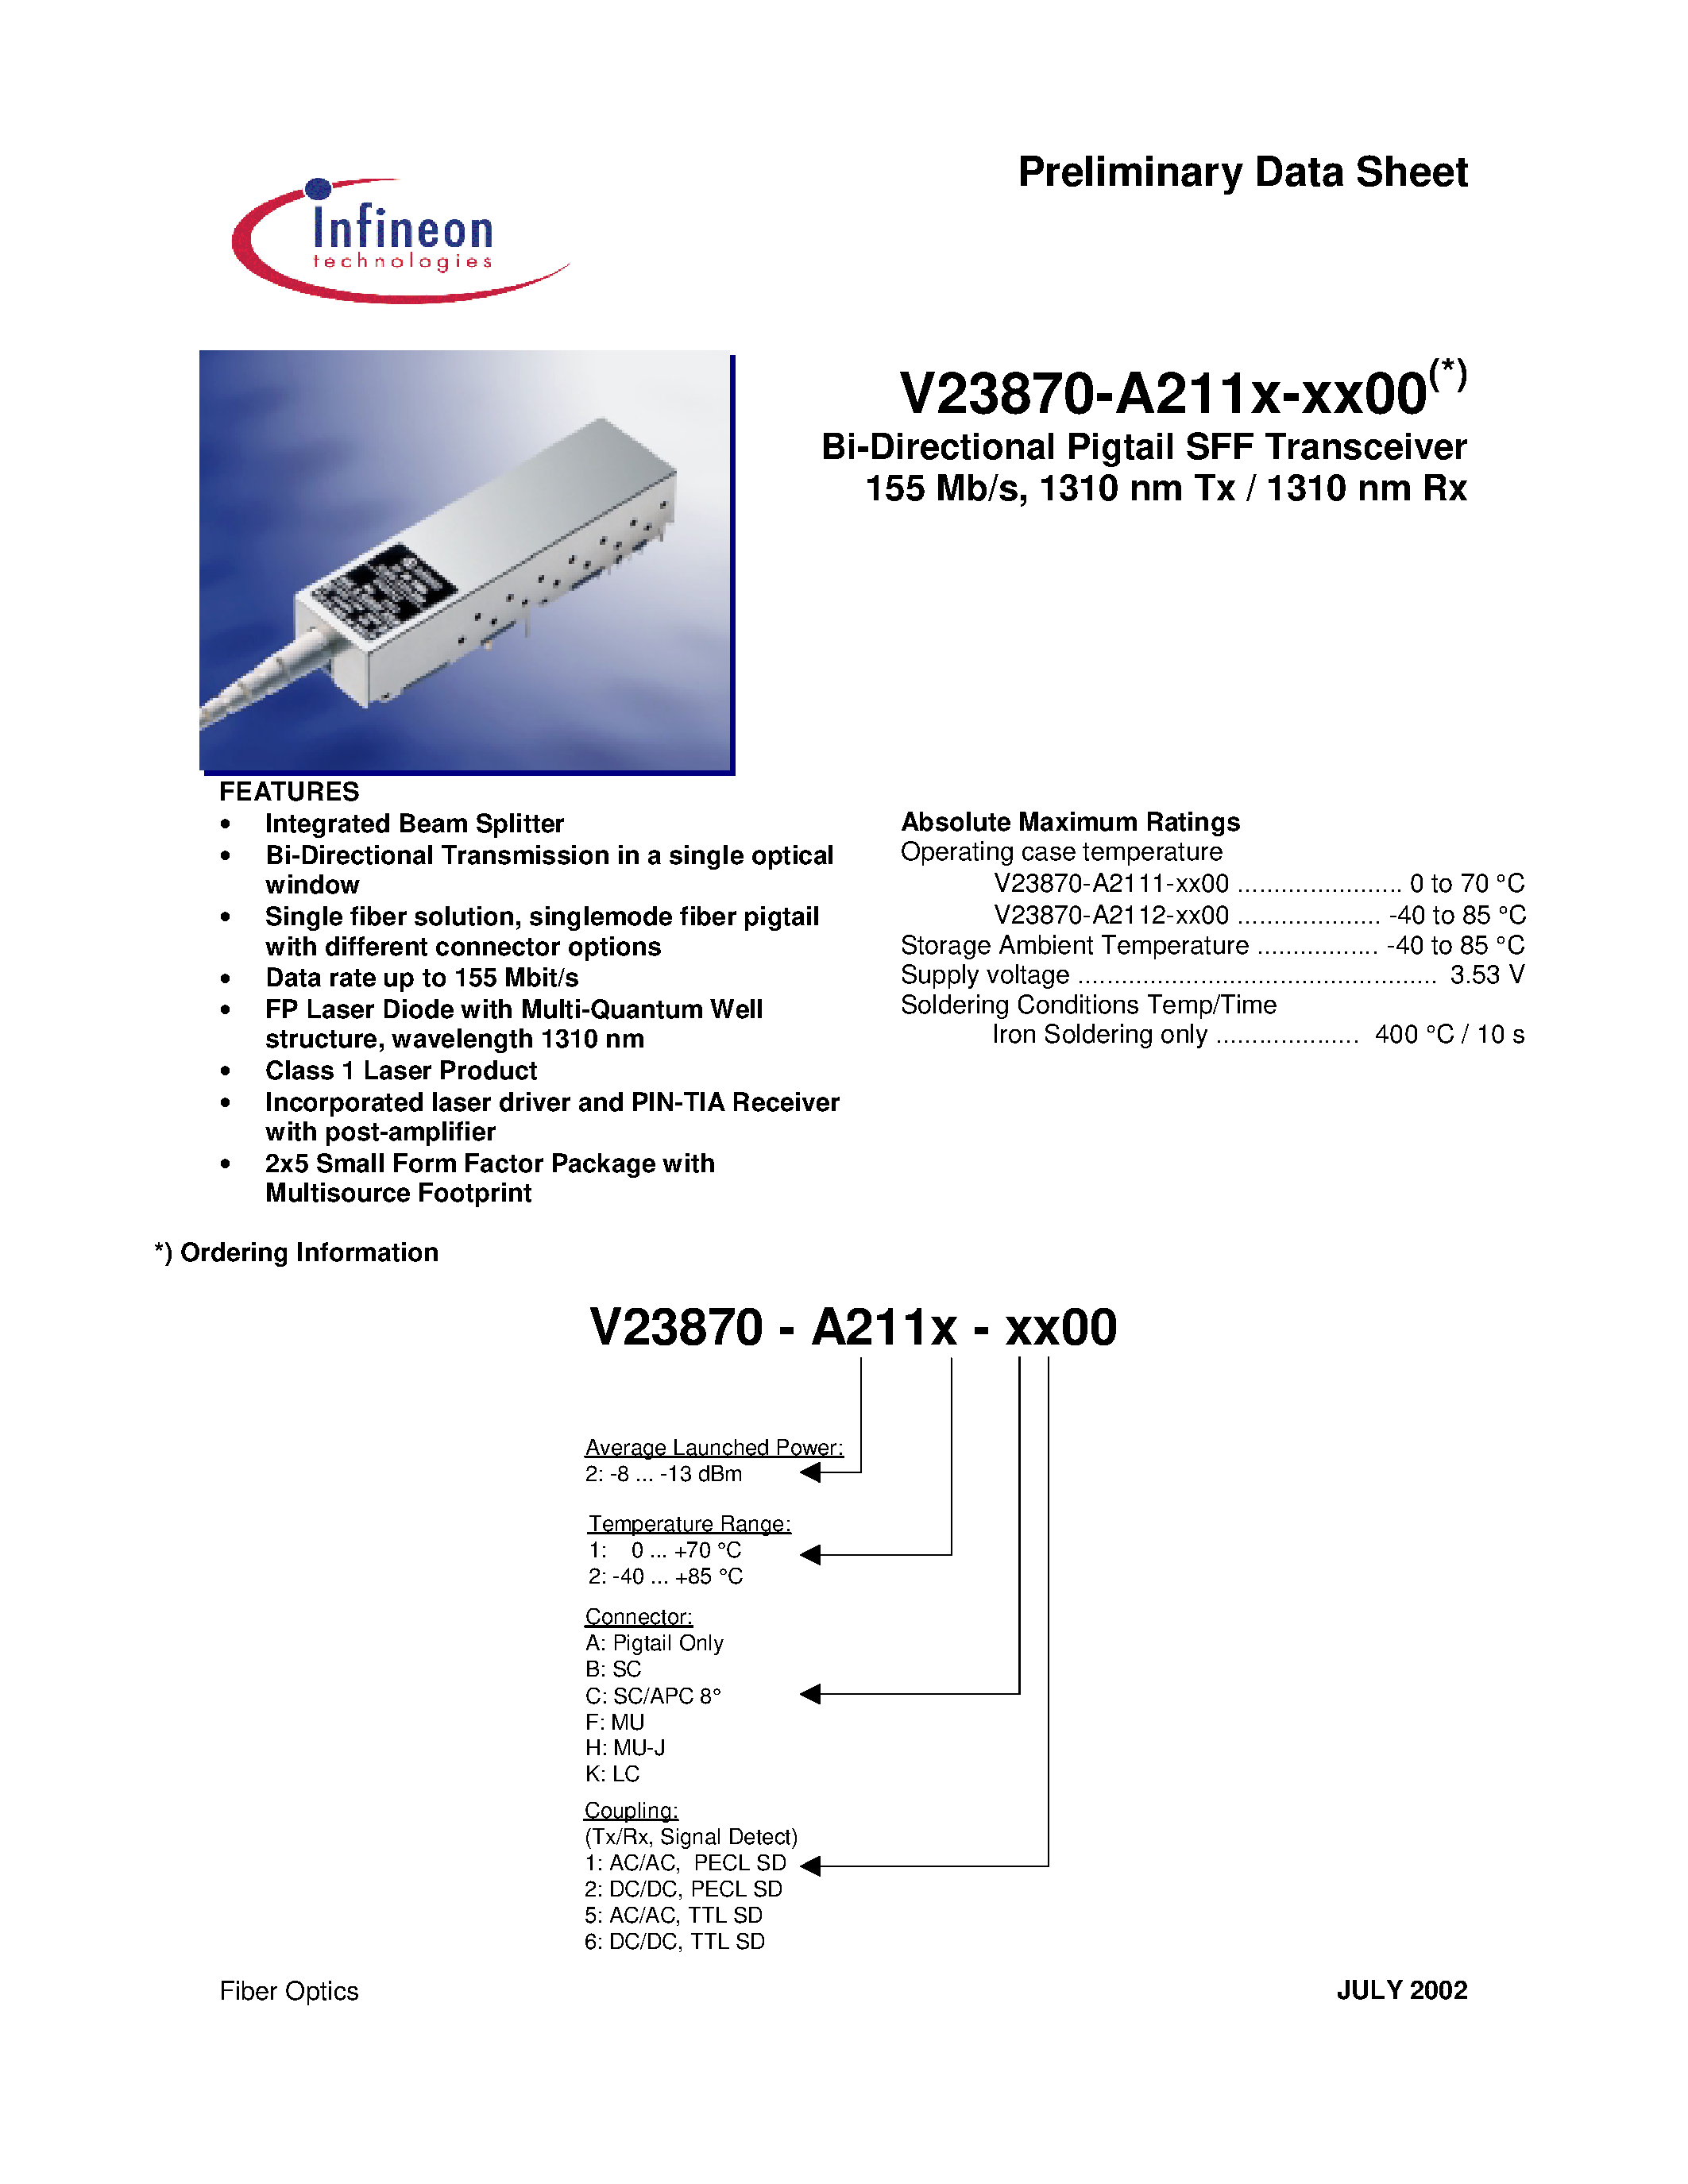 Datasheet V23870-A2112-F100 - Bi-Directional Pigtail SFF Transceiver 155 Mb/s/ 1310 nm Tx / 1310 nm Rx page 1